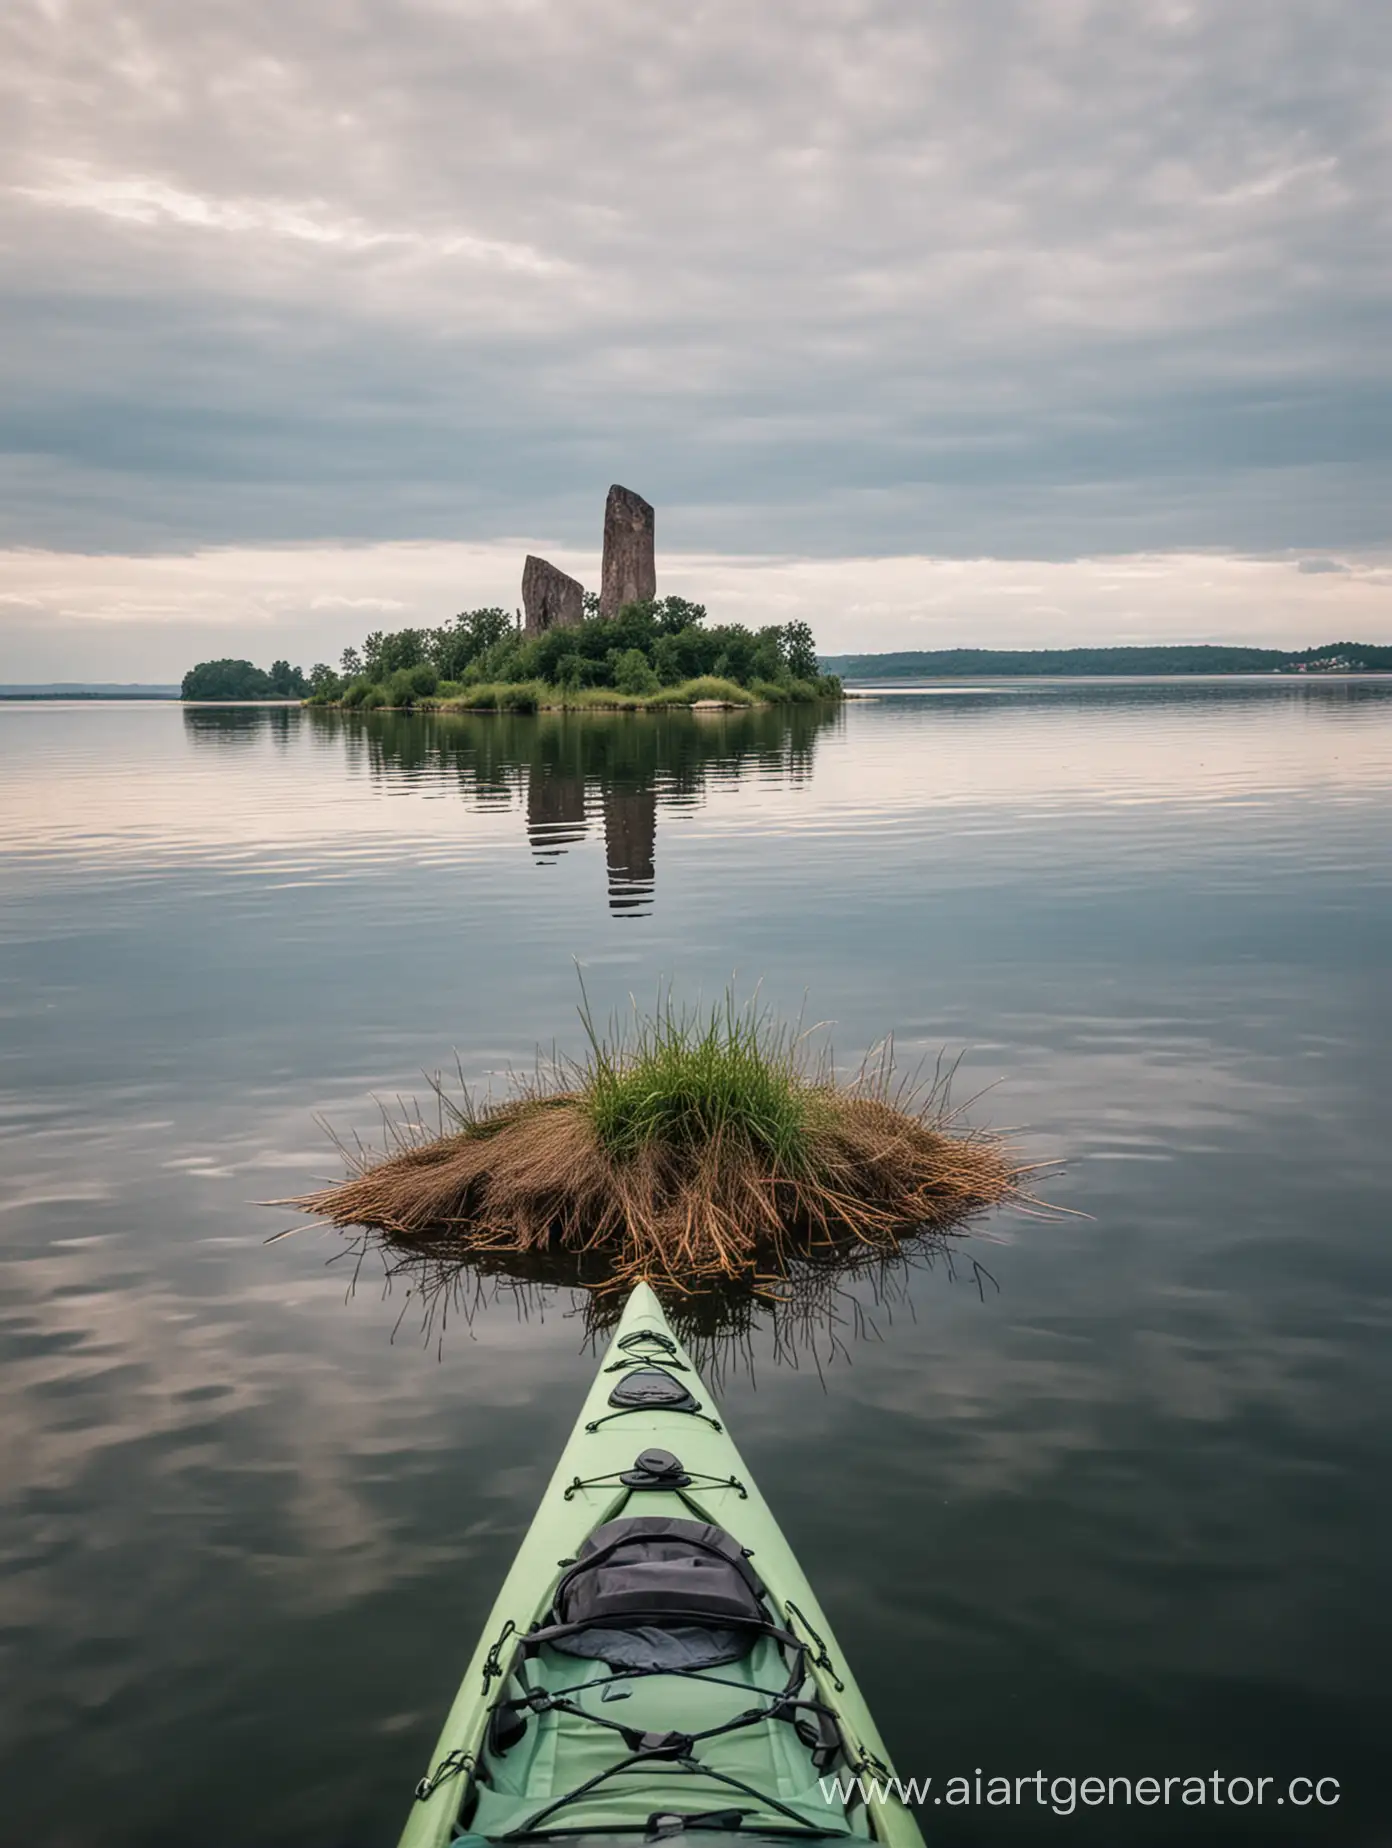 Gibonov island on Zalew Sulejowski Lake in Poland. The island is seen on the picture from a kayak. There is a prehistoric old monument deep in the island and can be see from distance, and for the person on kayak.